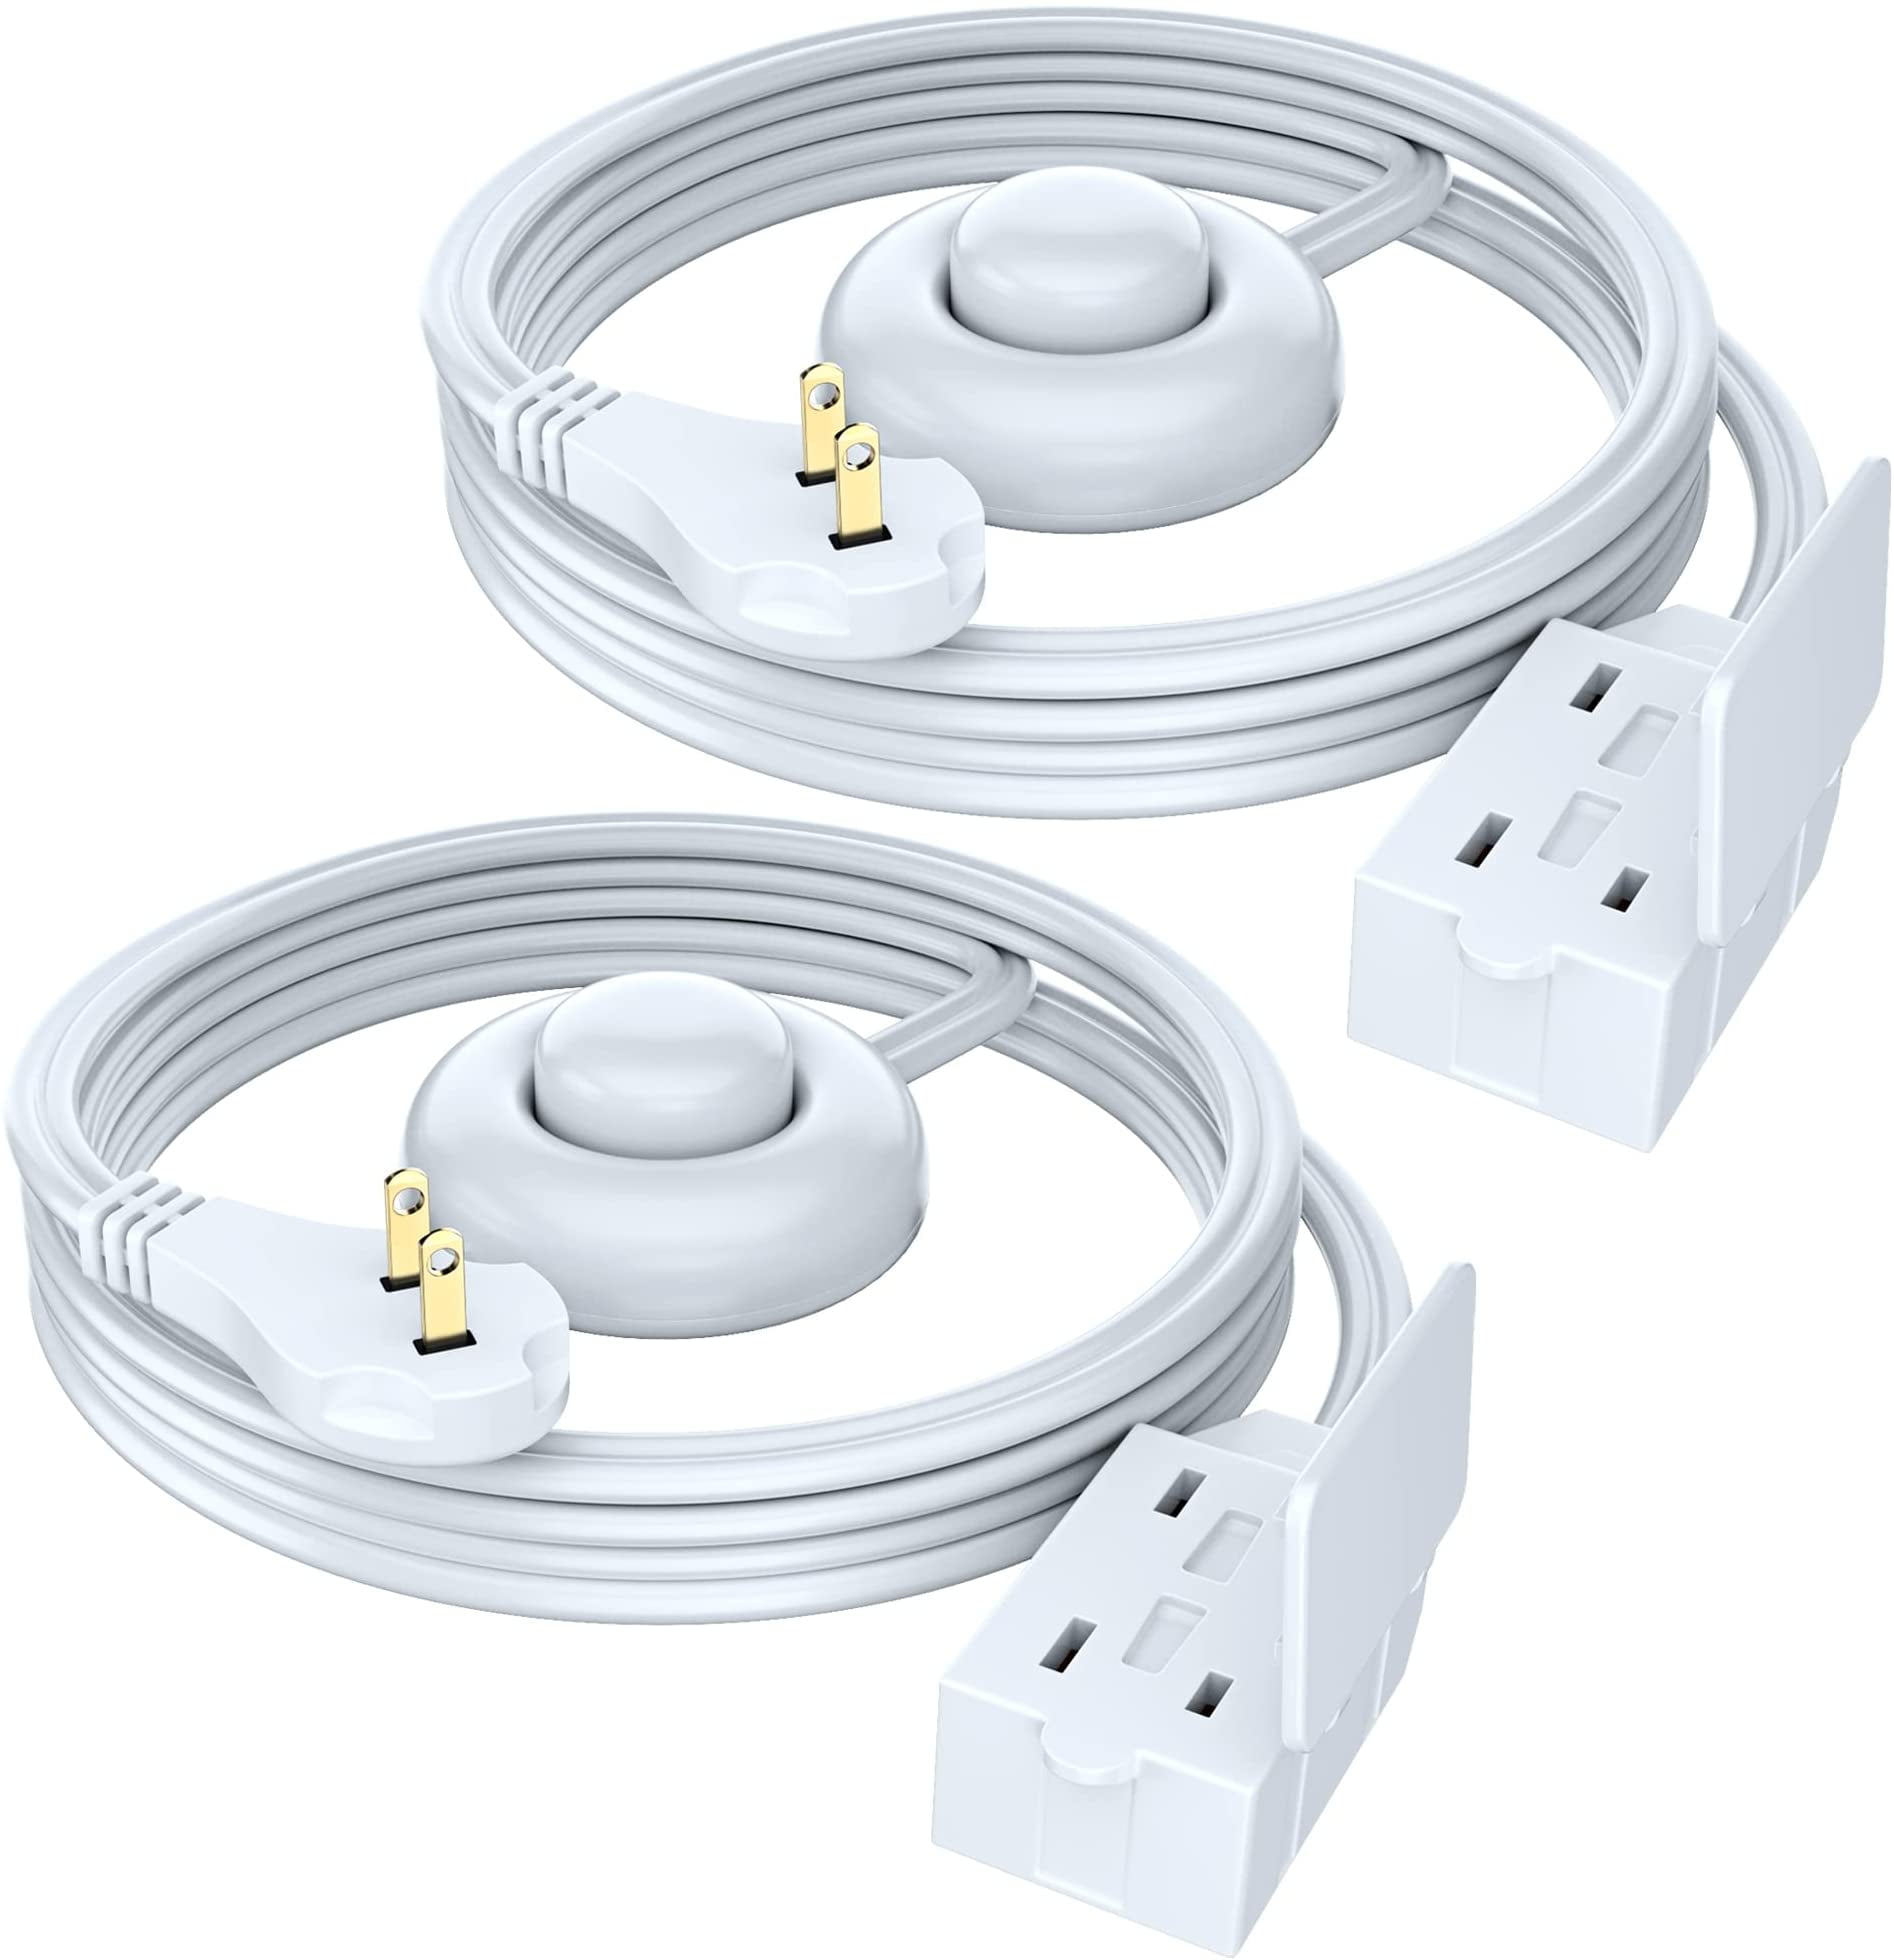 Maximm 25 ft Cable Safety Extension Cord with Automatic Lock Hook Extension  Cord Holder and Child Proof Outlet Cover - White, 16 AWG, SJTW, Heavy Duty  Outdoor Extension Cord with Multiple Outlets 